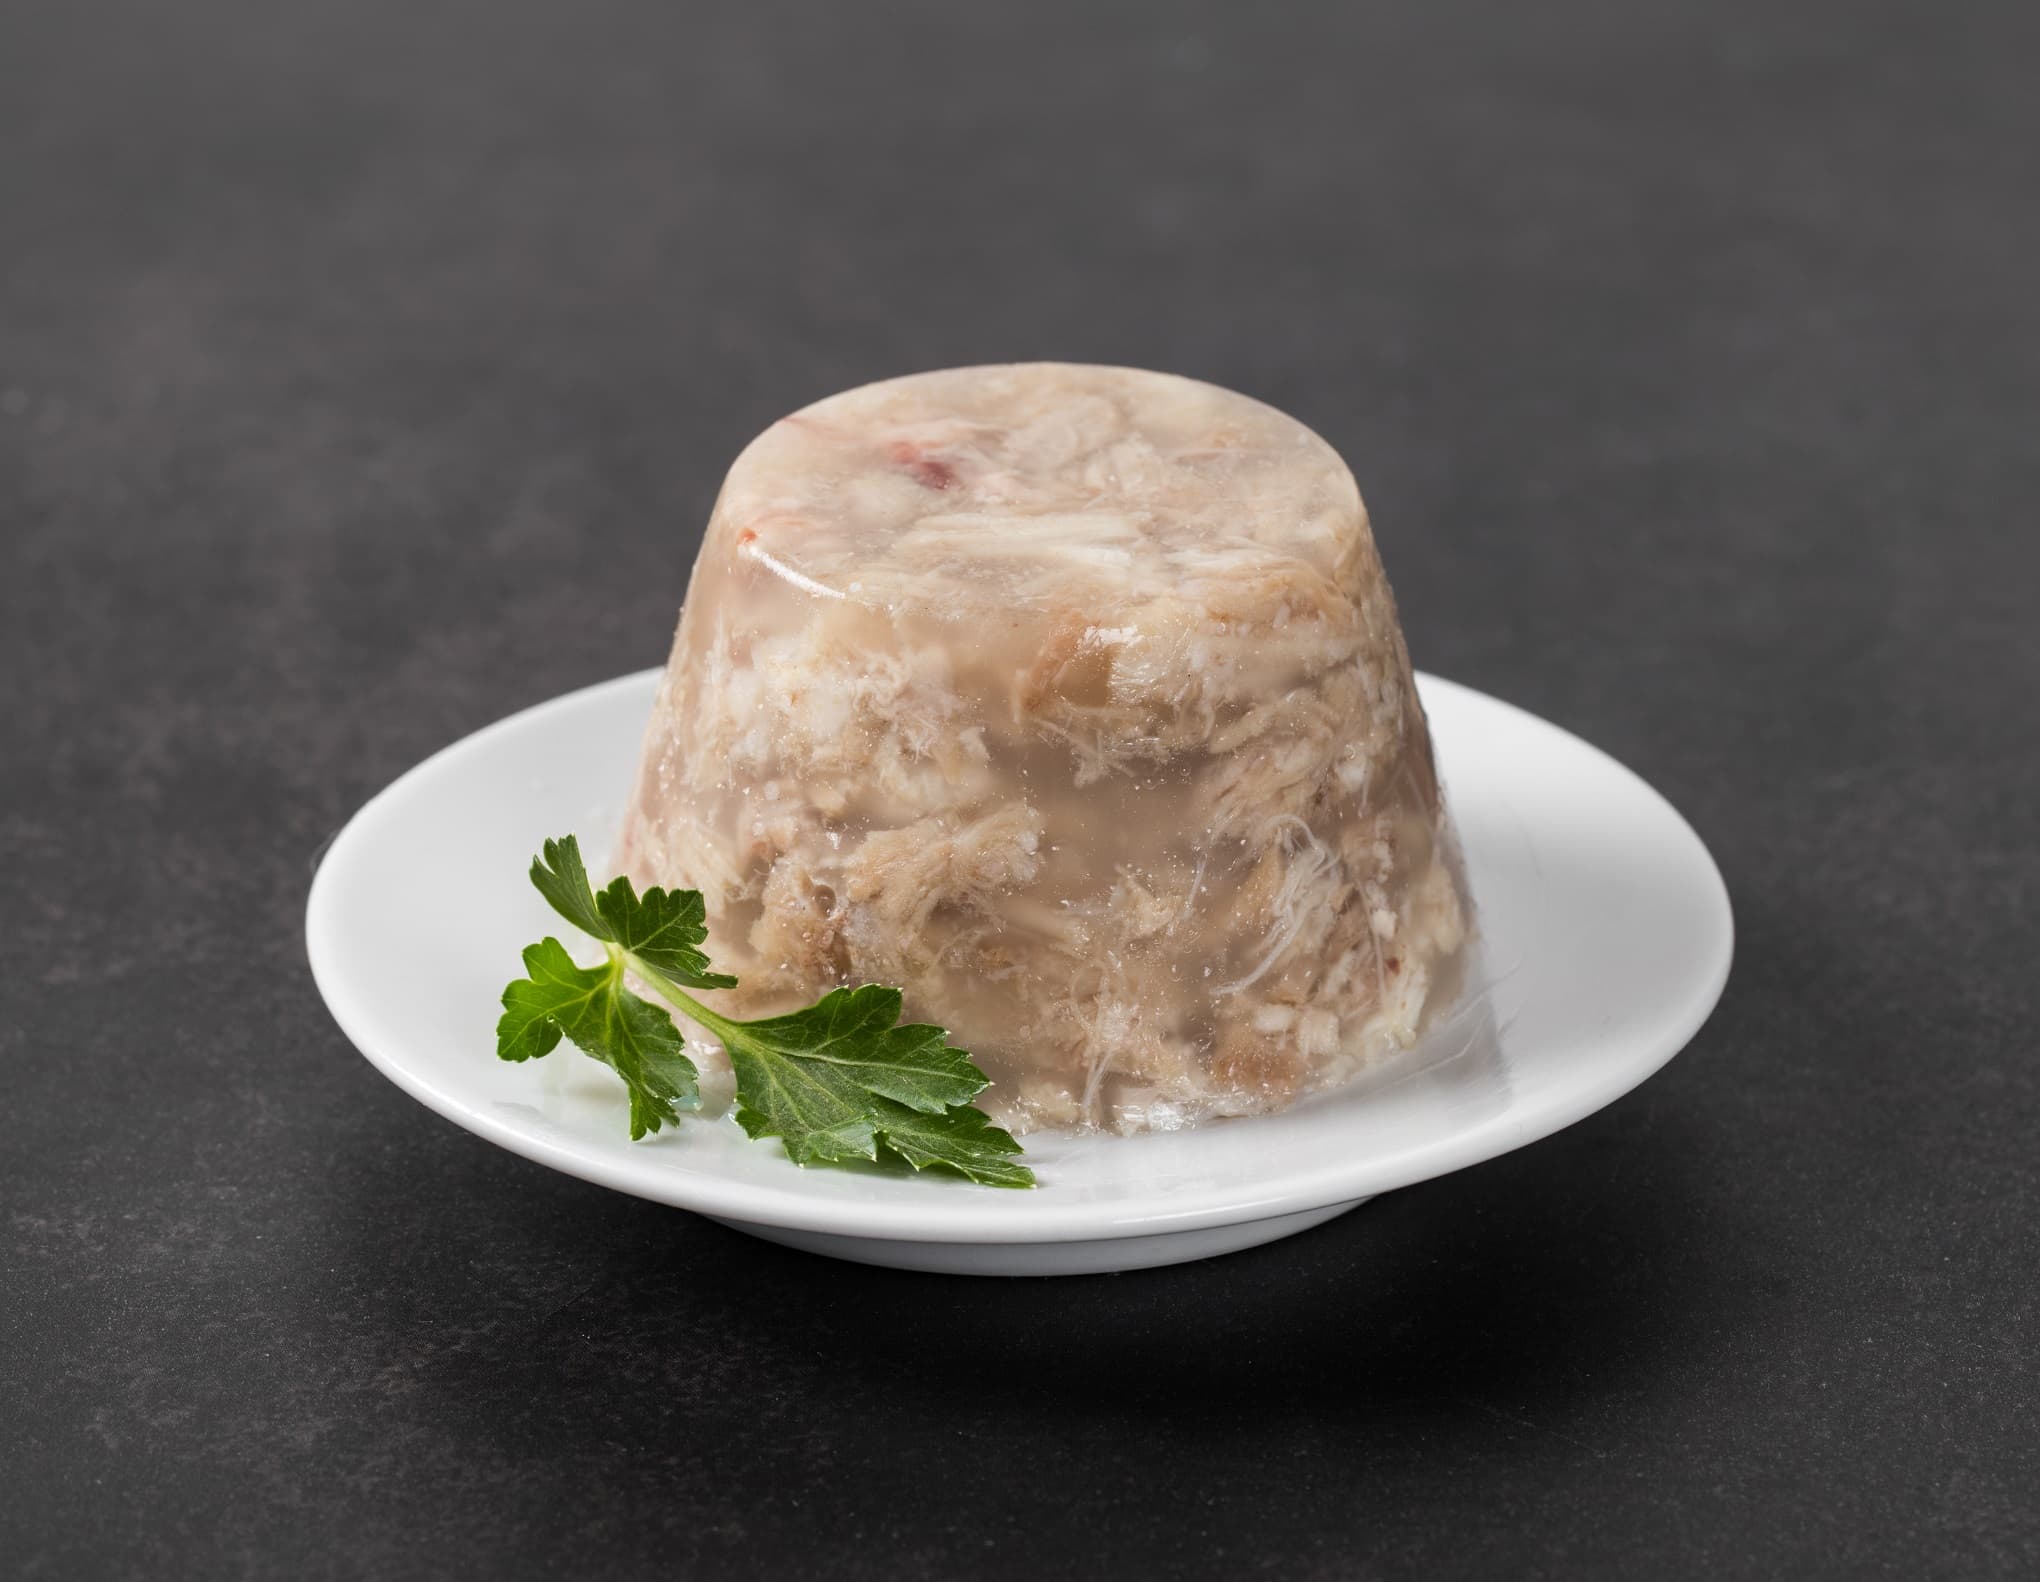 Traditional Russian festive cold appetizer. Pork jelly with pork slices and parsley on a plate on a dark gray background. Dish of thickened to a jelly-like mass from cooling meat broth with pieces of meat